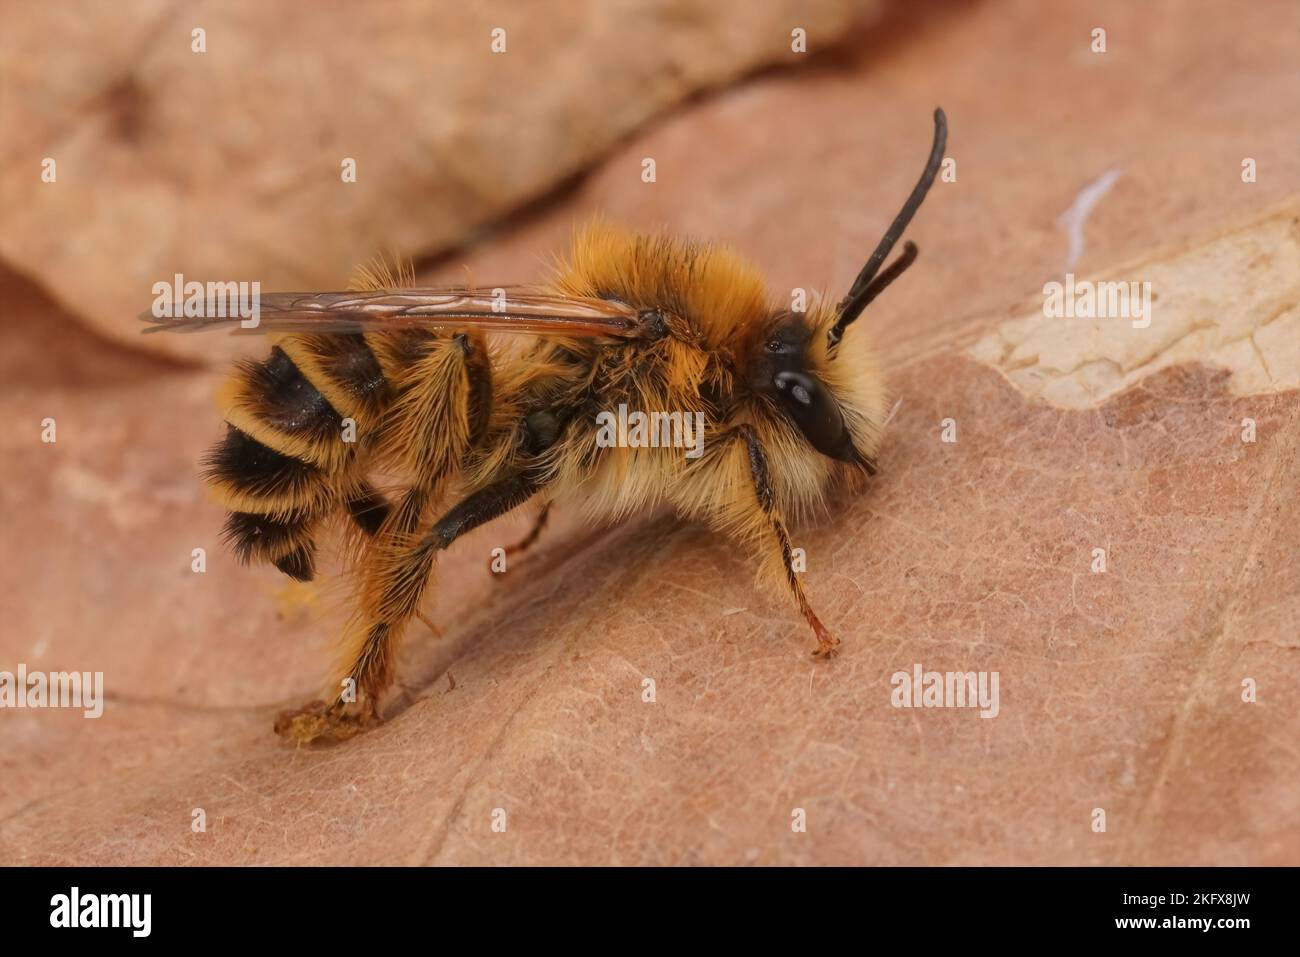 Closeup on a hairy male Pantaloon bee, Dasypoda hirtipes sittting on dried leafs Stock Photo